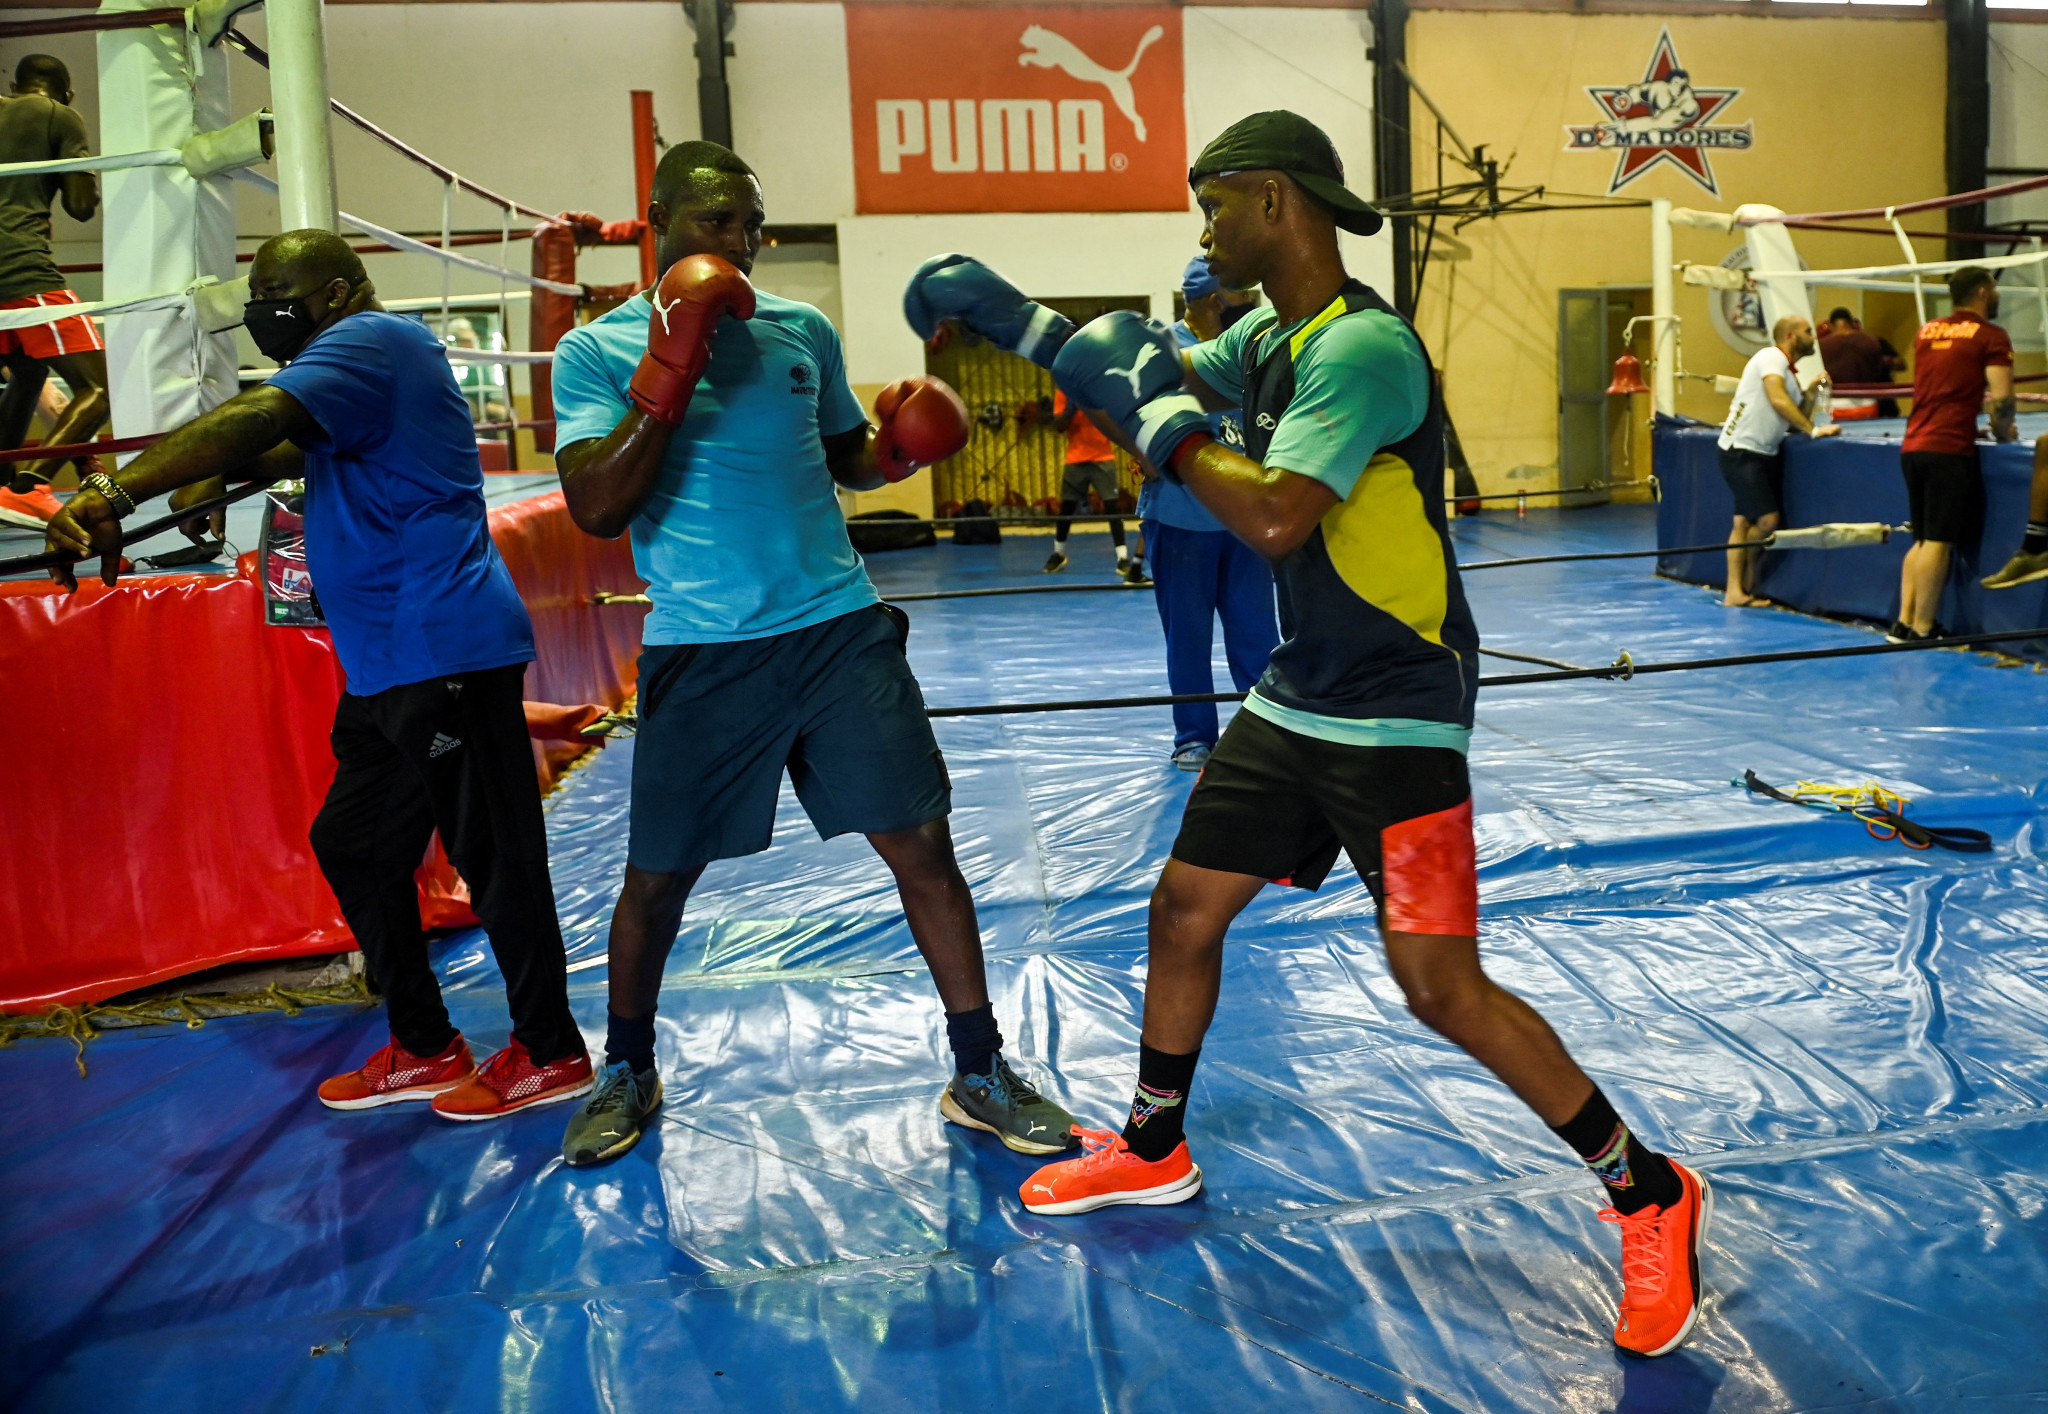 Kweku Ofosu-Asare has suggested Cuba as a possible location for a boxing training programme ©Getty Images